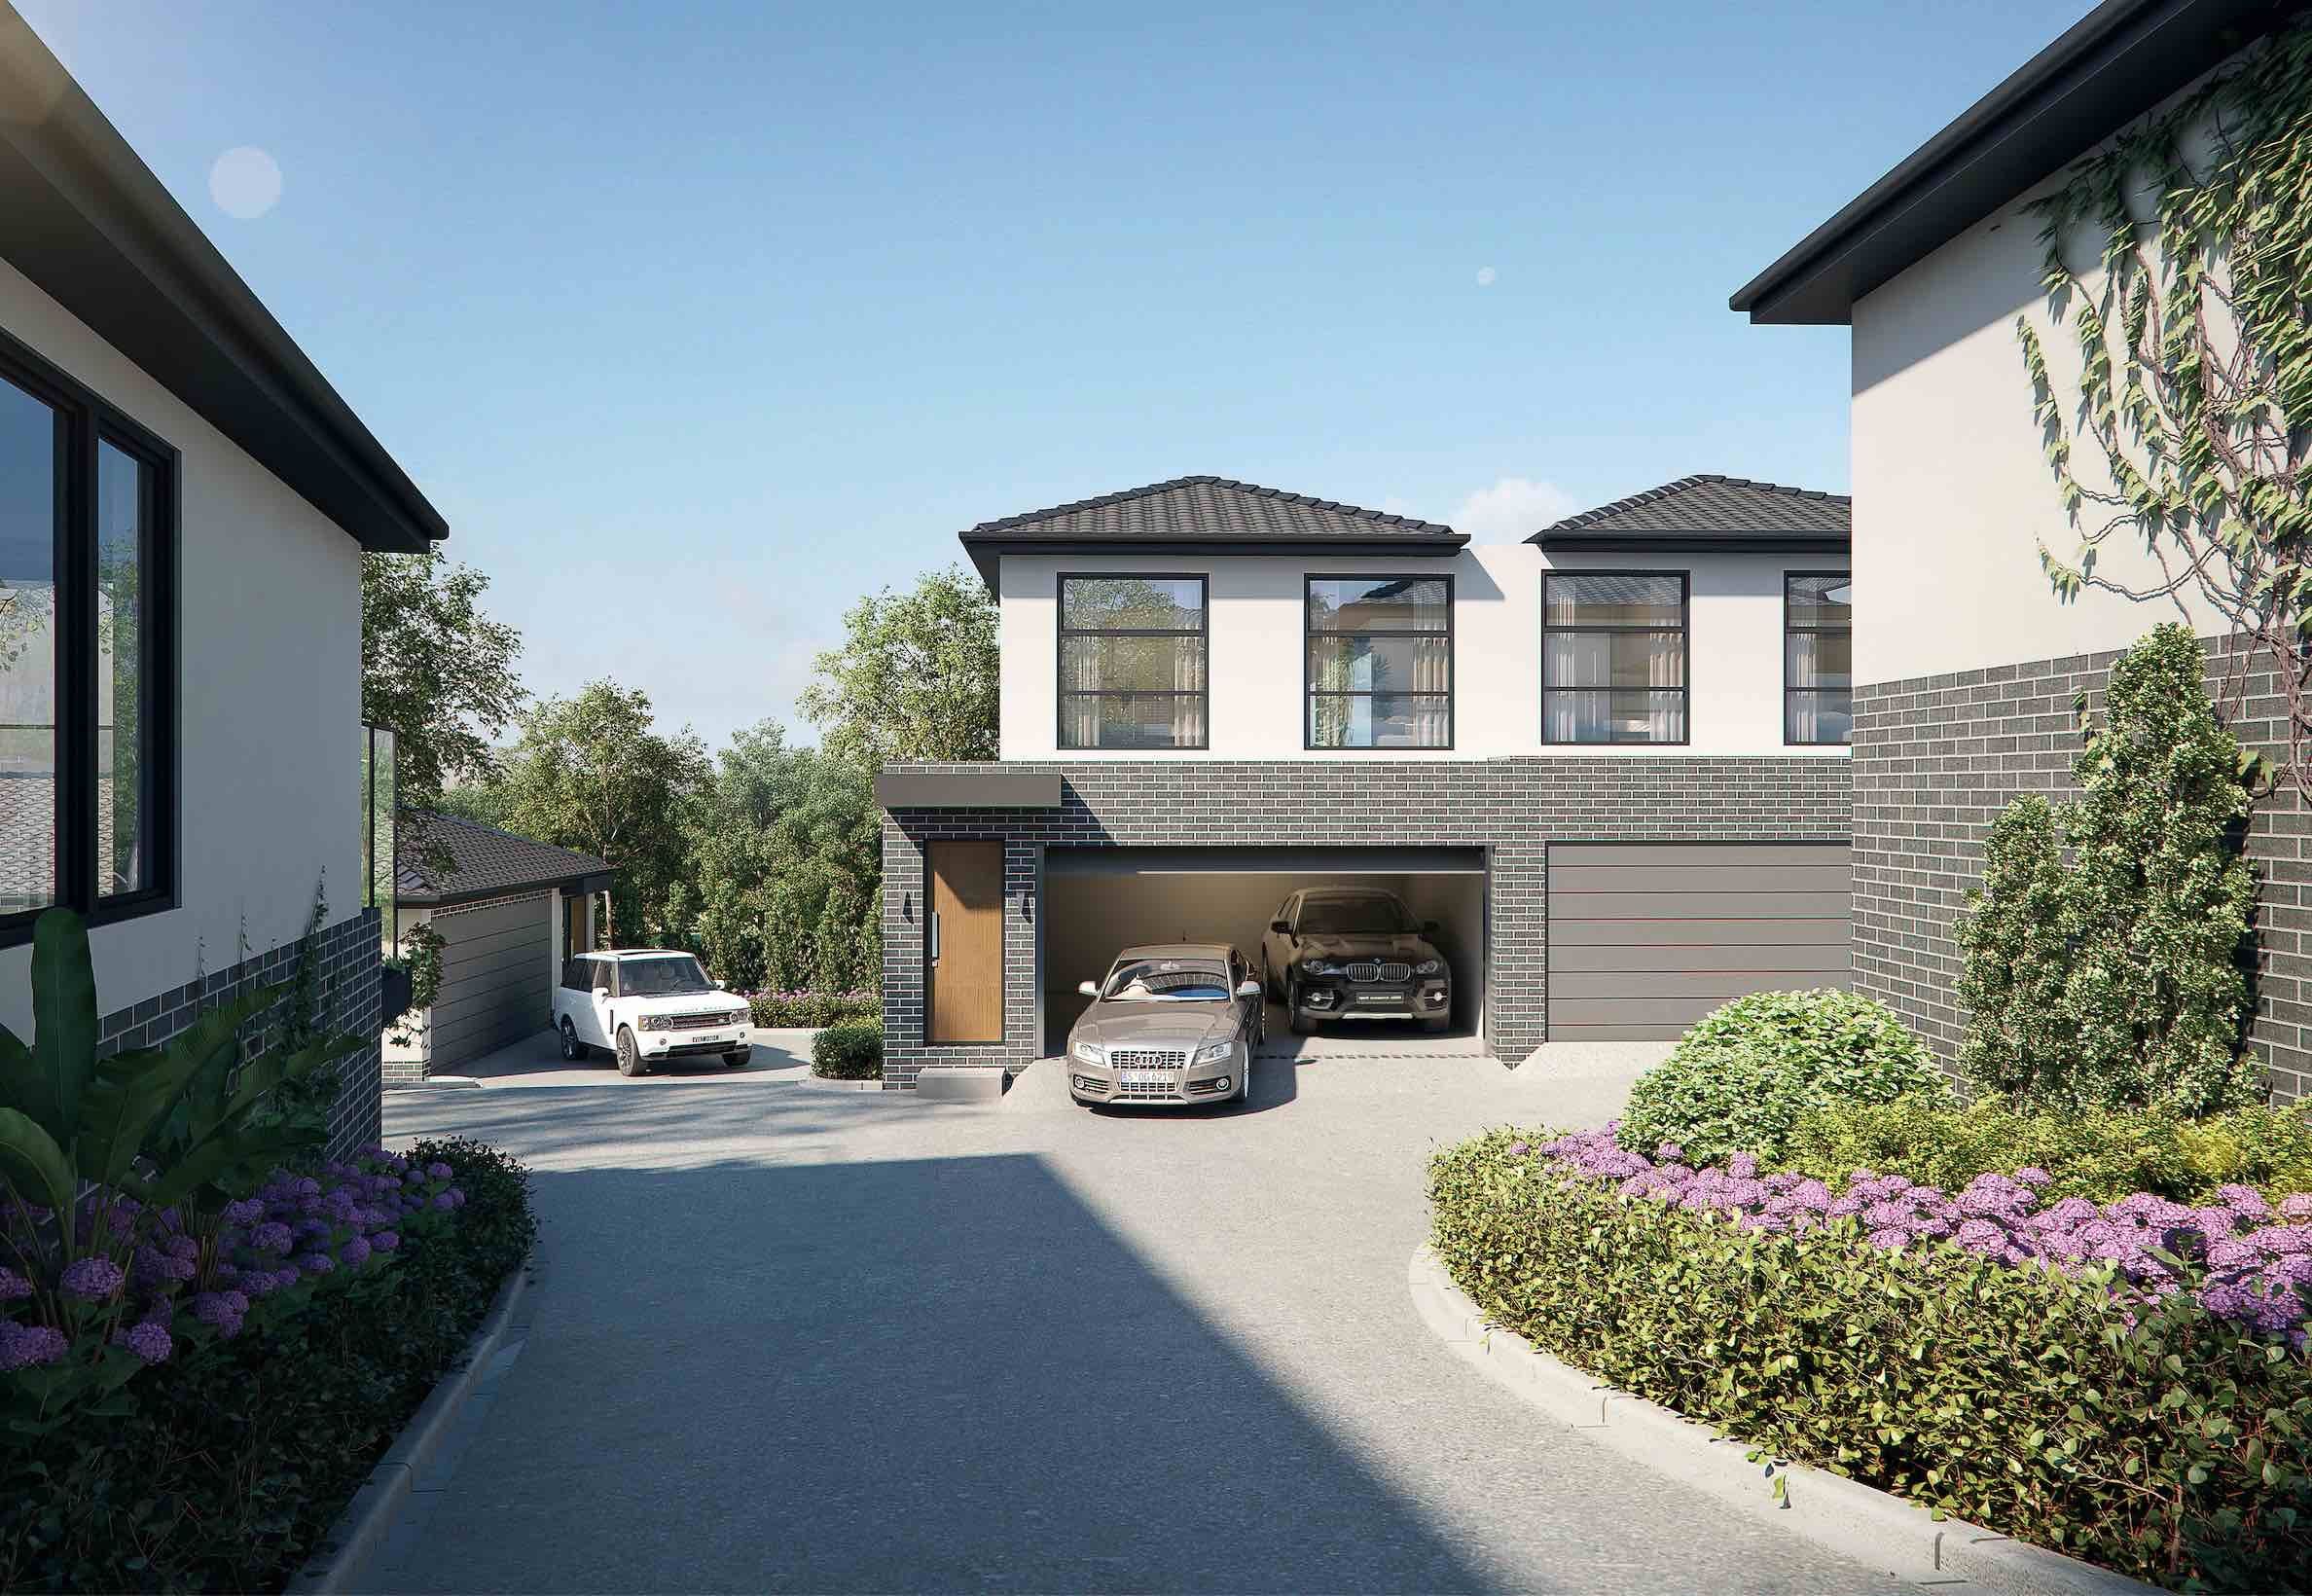 Lilydale - Lilydale Gardens - 25 Albert Hill Road, Lilydale, VIC 3140 - Townly - 1.jpg